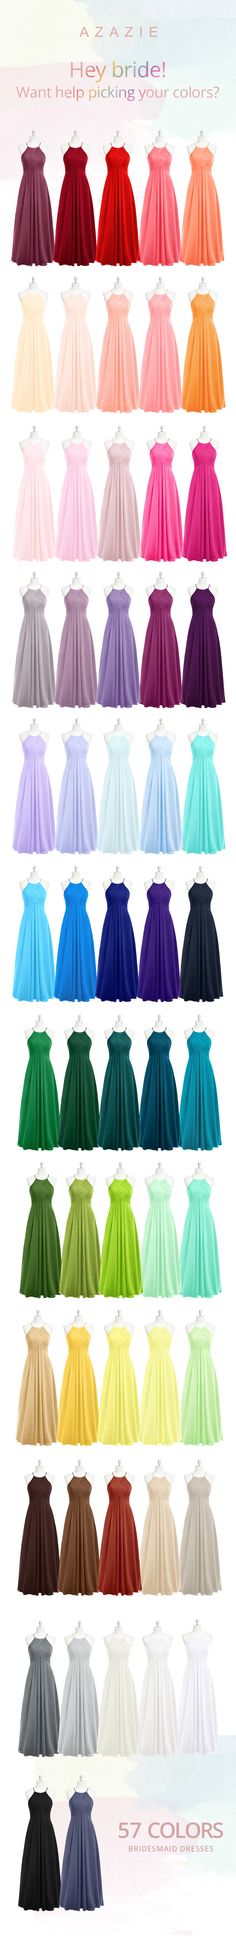 Azazie is the online destination for special occasion dresses. Our online boutique connects bridesmaids and brides with over 400 on-trend styles, where each is available in 50+ colors.